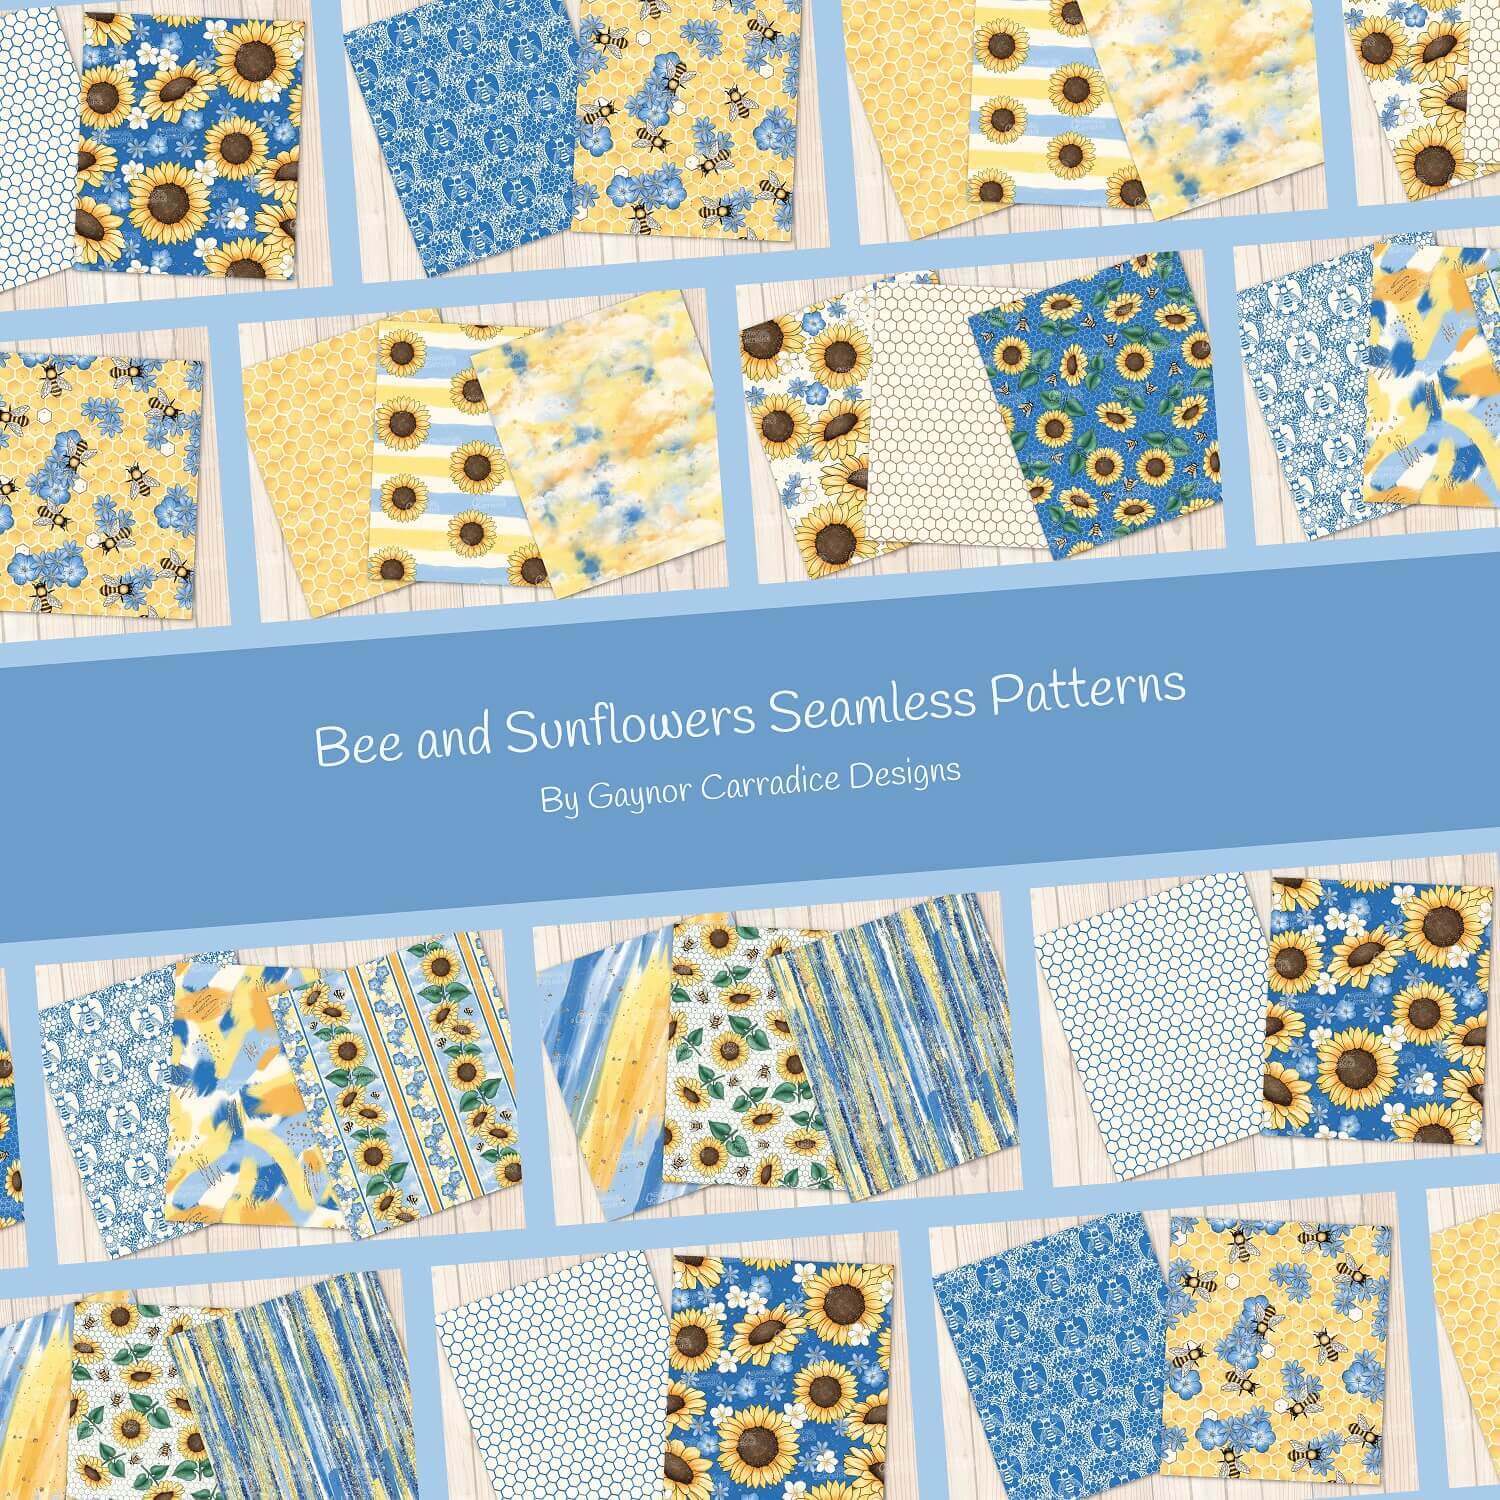 Bee and Sunflowers Seamless Patterns.